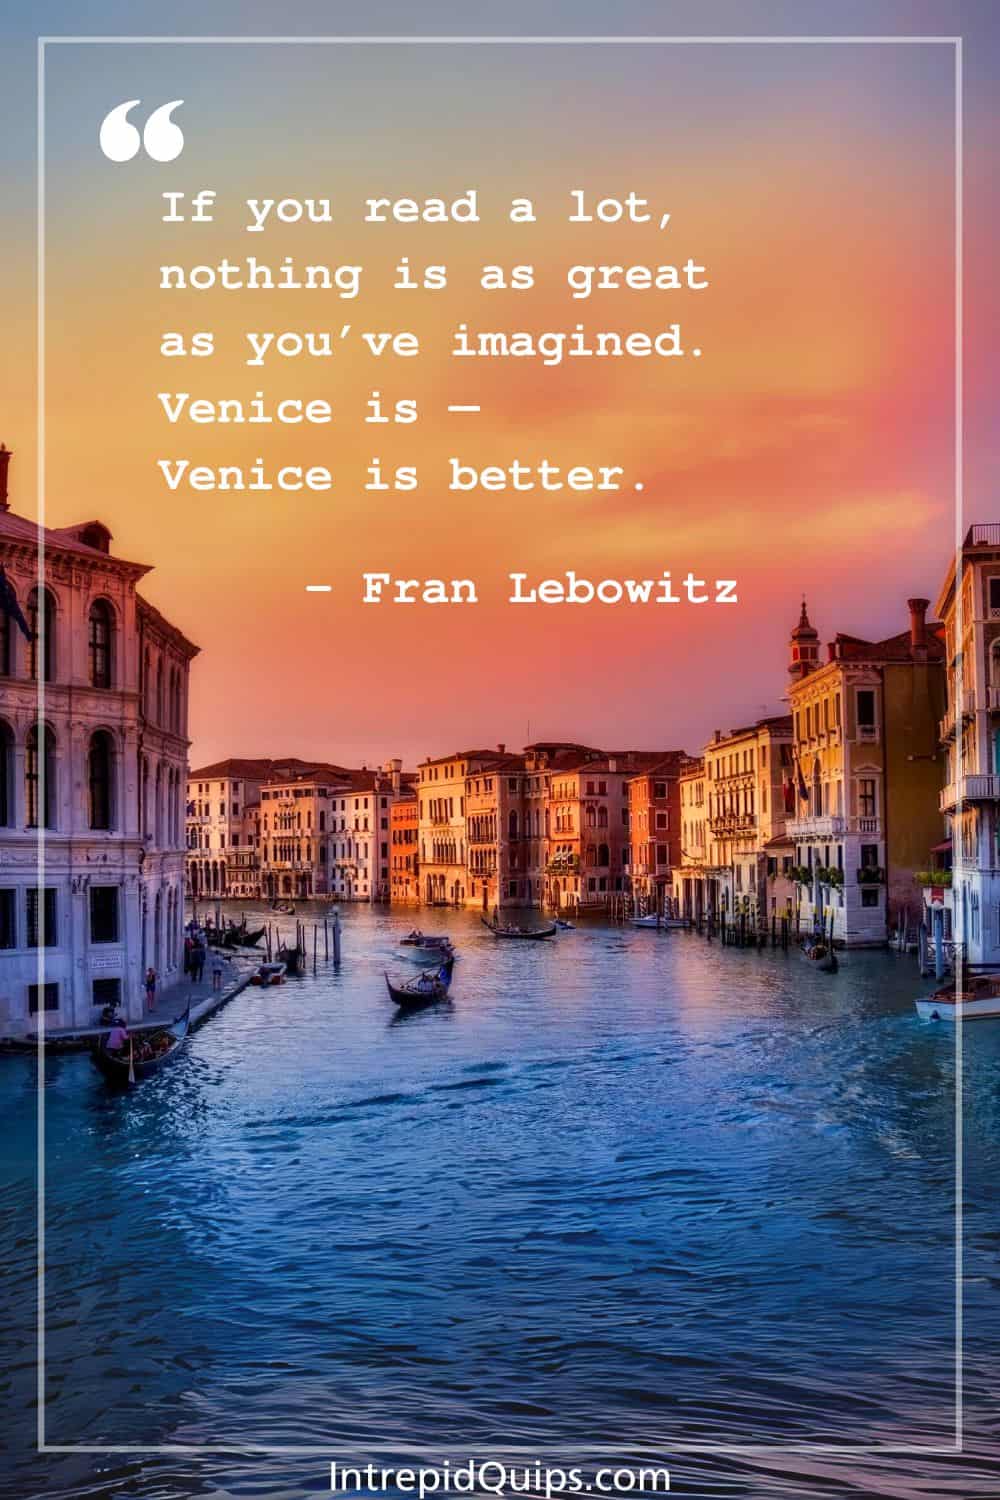 80 Venice Quotes And Captions Celebrating The Floating City ...